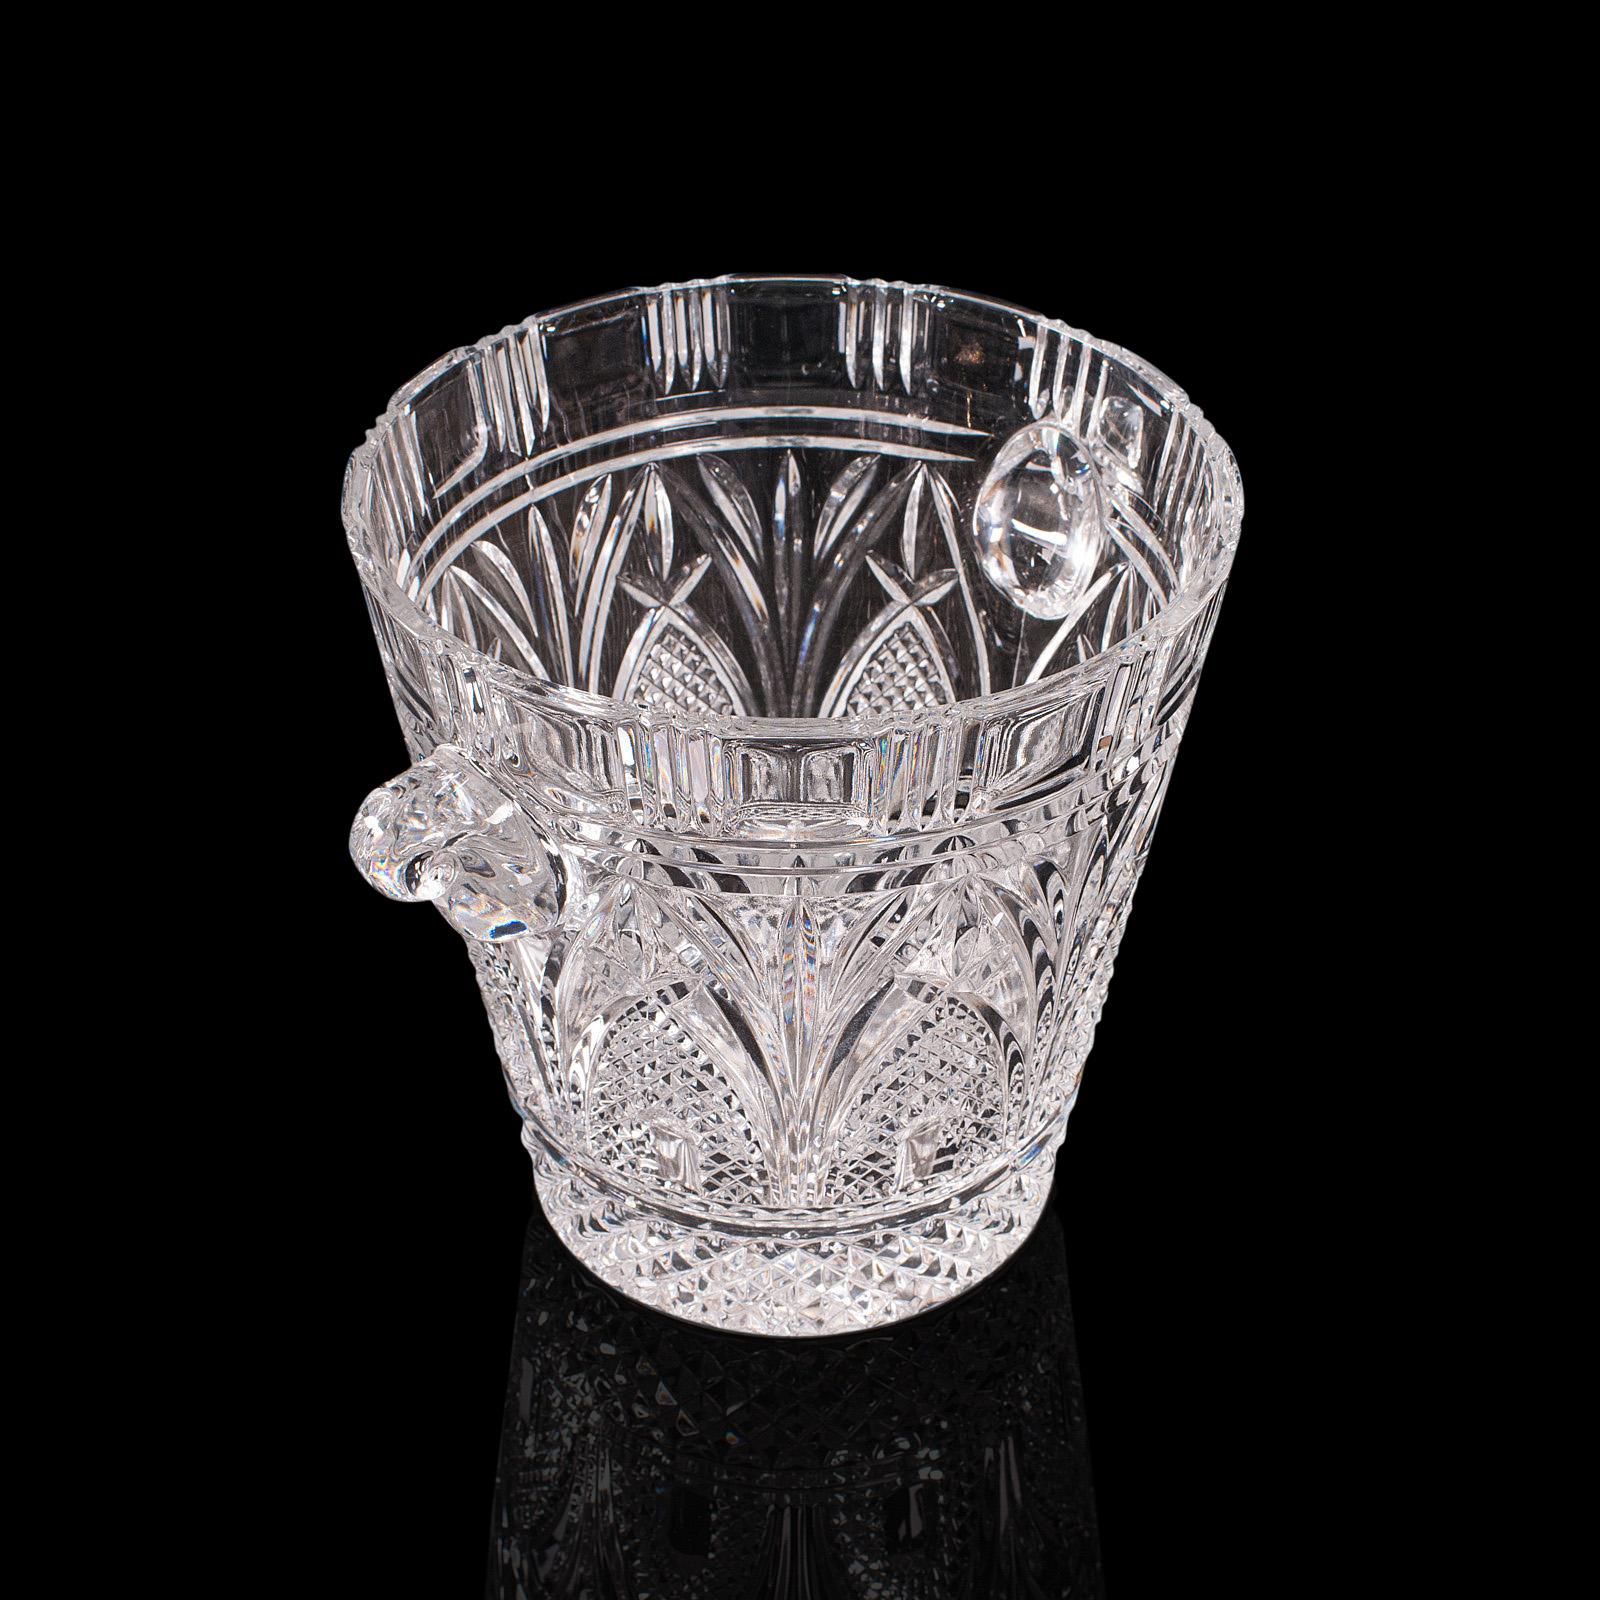 Cut Glass Antique Champagne Cooler, English, Wine, Large, Drinks, Ice Bucket, Edwardian